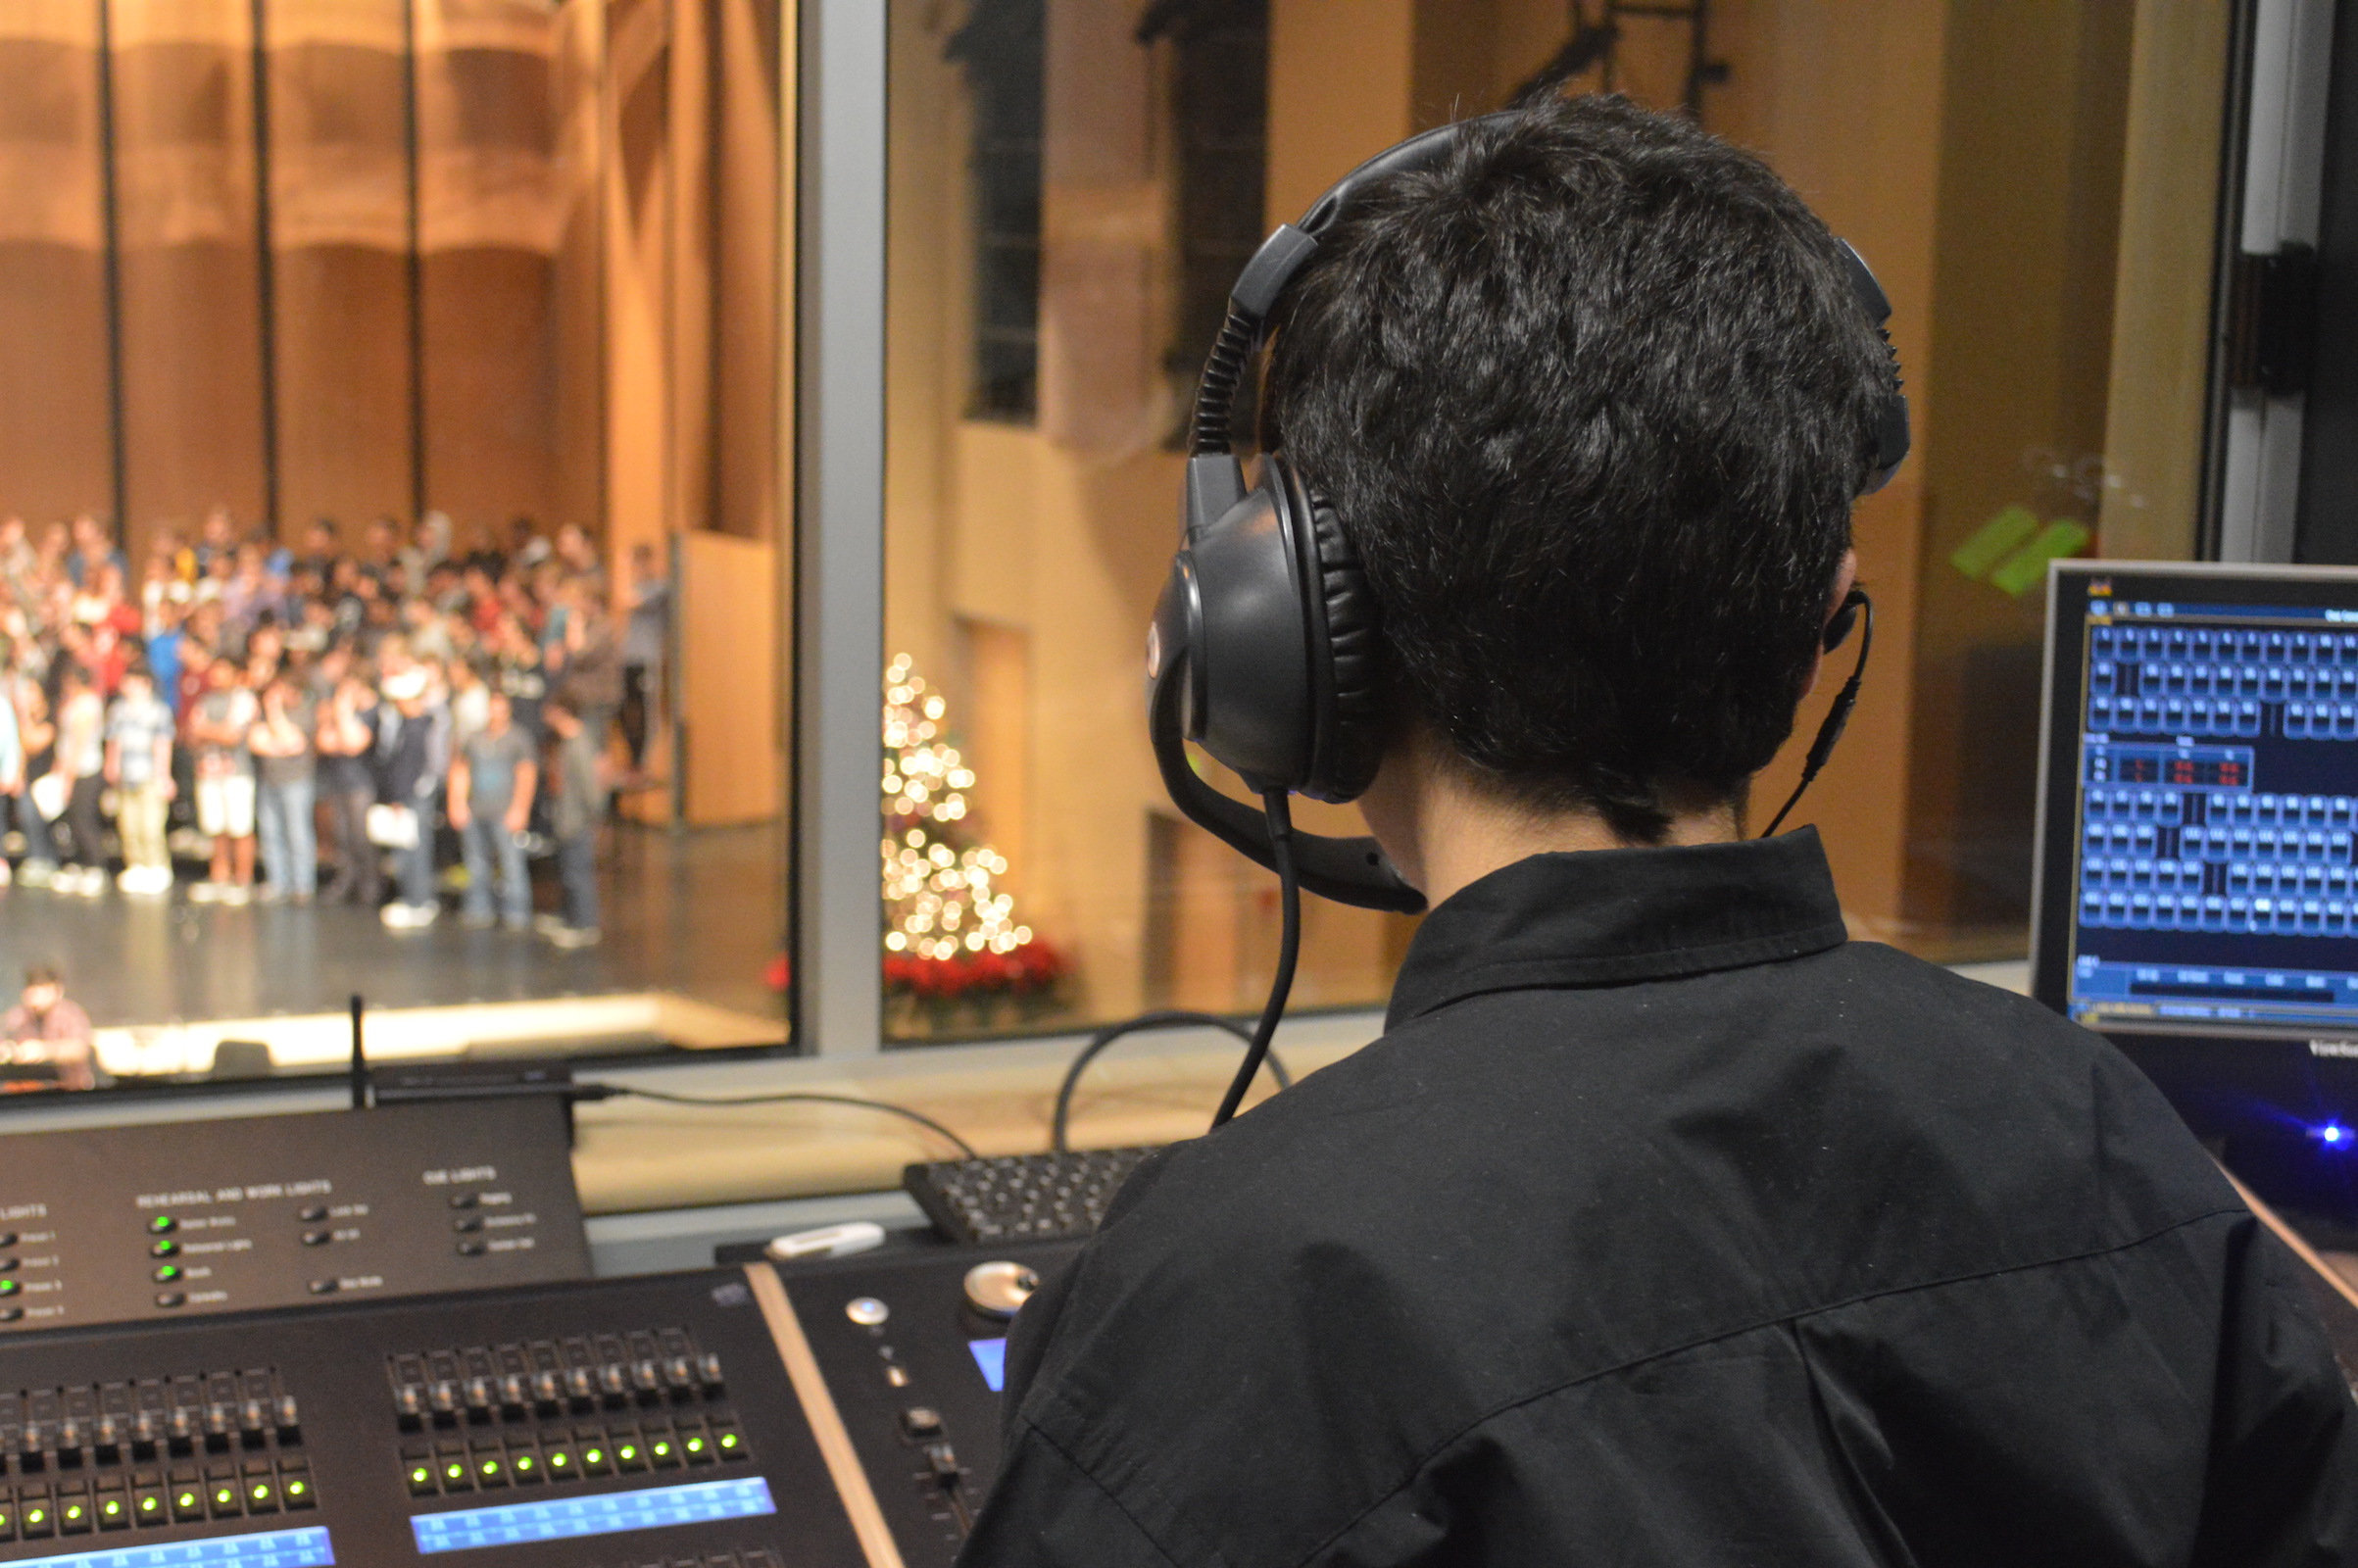 Freshman+Andres+Raddavero+runs+the+light+board+during+rehearsal+for+Carlmont%E2%80%99s+winter+choir+show.+During+this+rehearsal%2C+Raddavero+learns+his+cues+for+the+upcoming+performances.+++